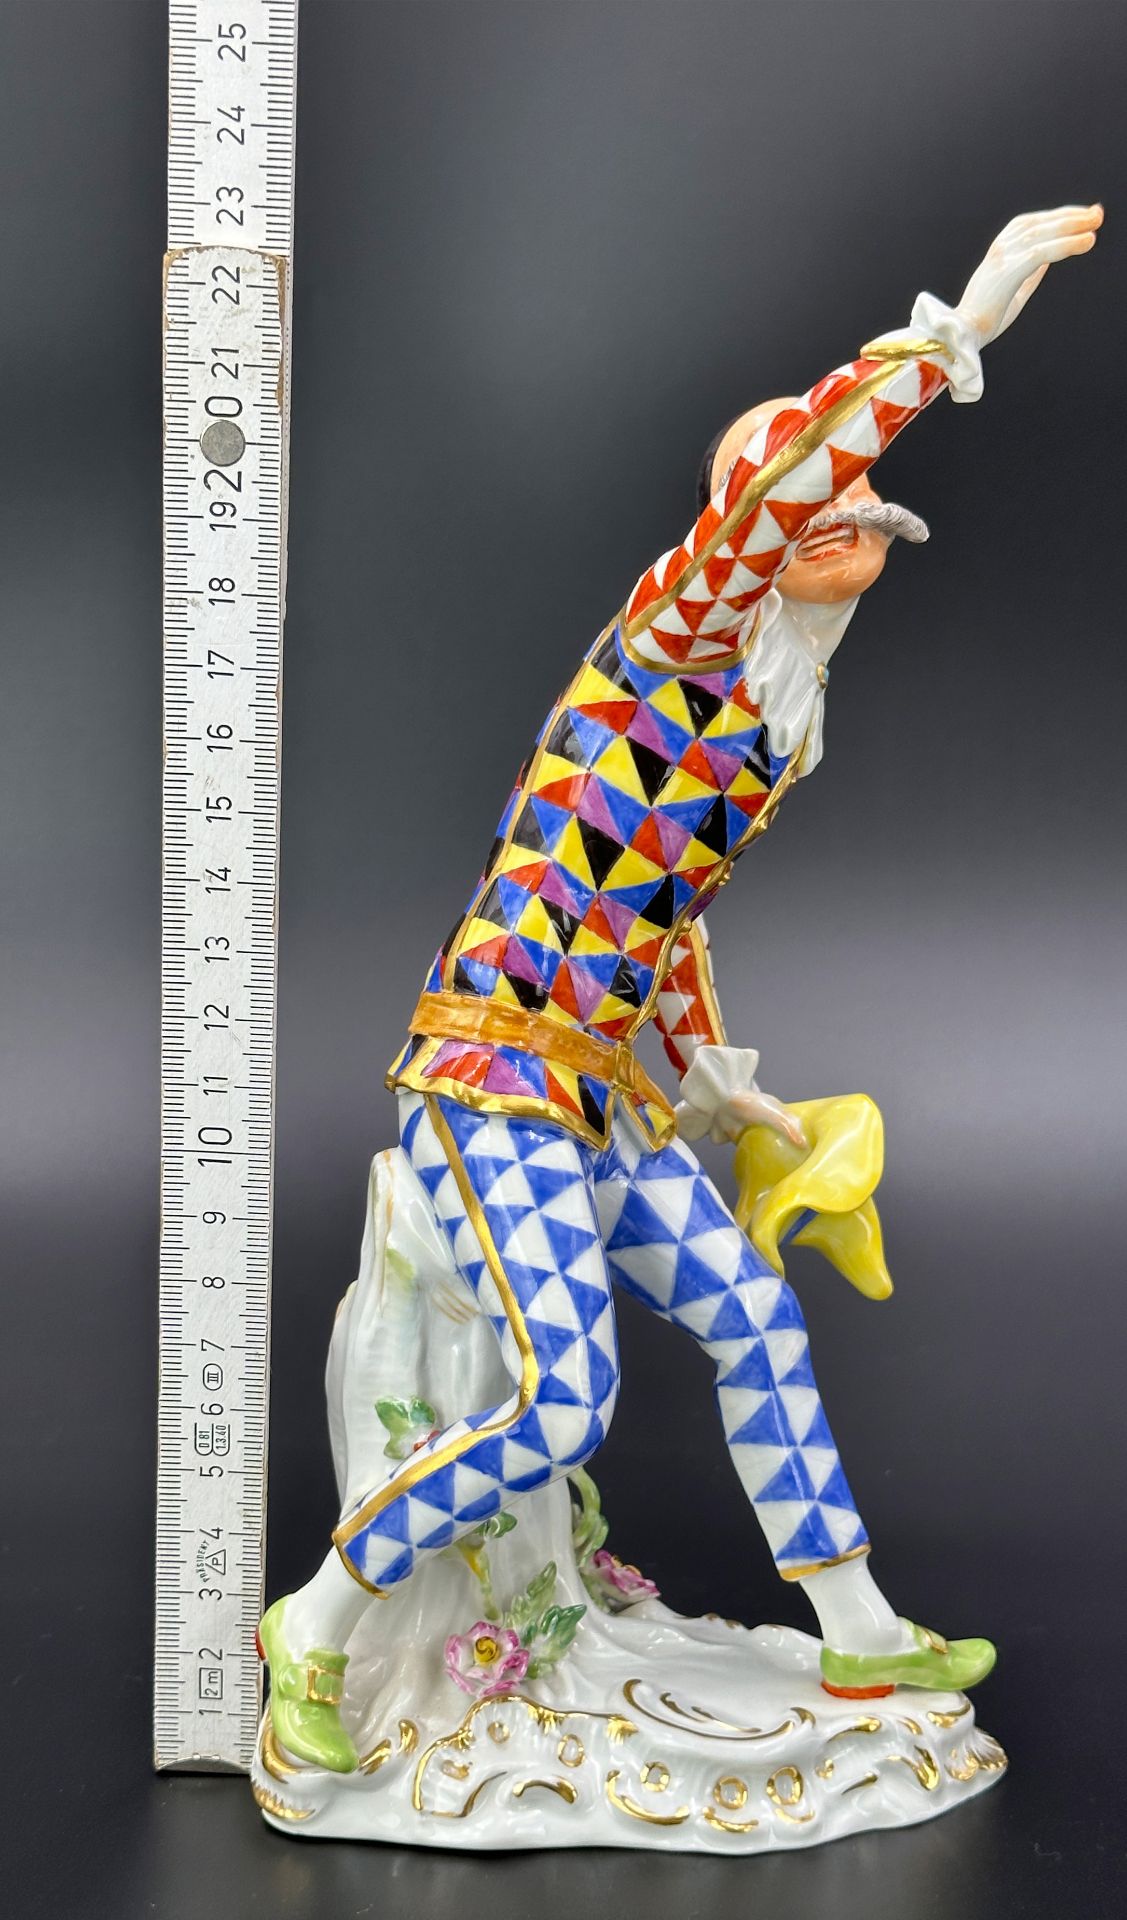 MEISSEN figure. Harlequin with hat. "Commedia dell' Arte". 1st choice. 20th century. - Image 11 of 11